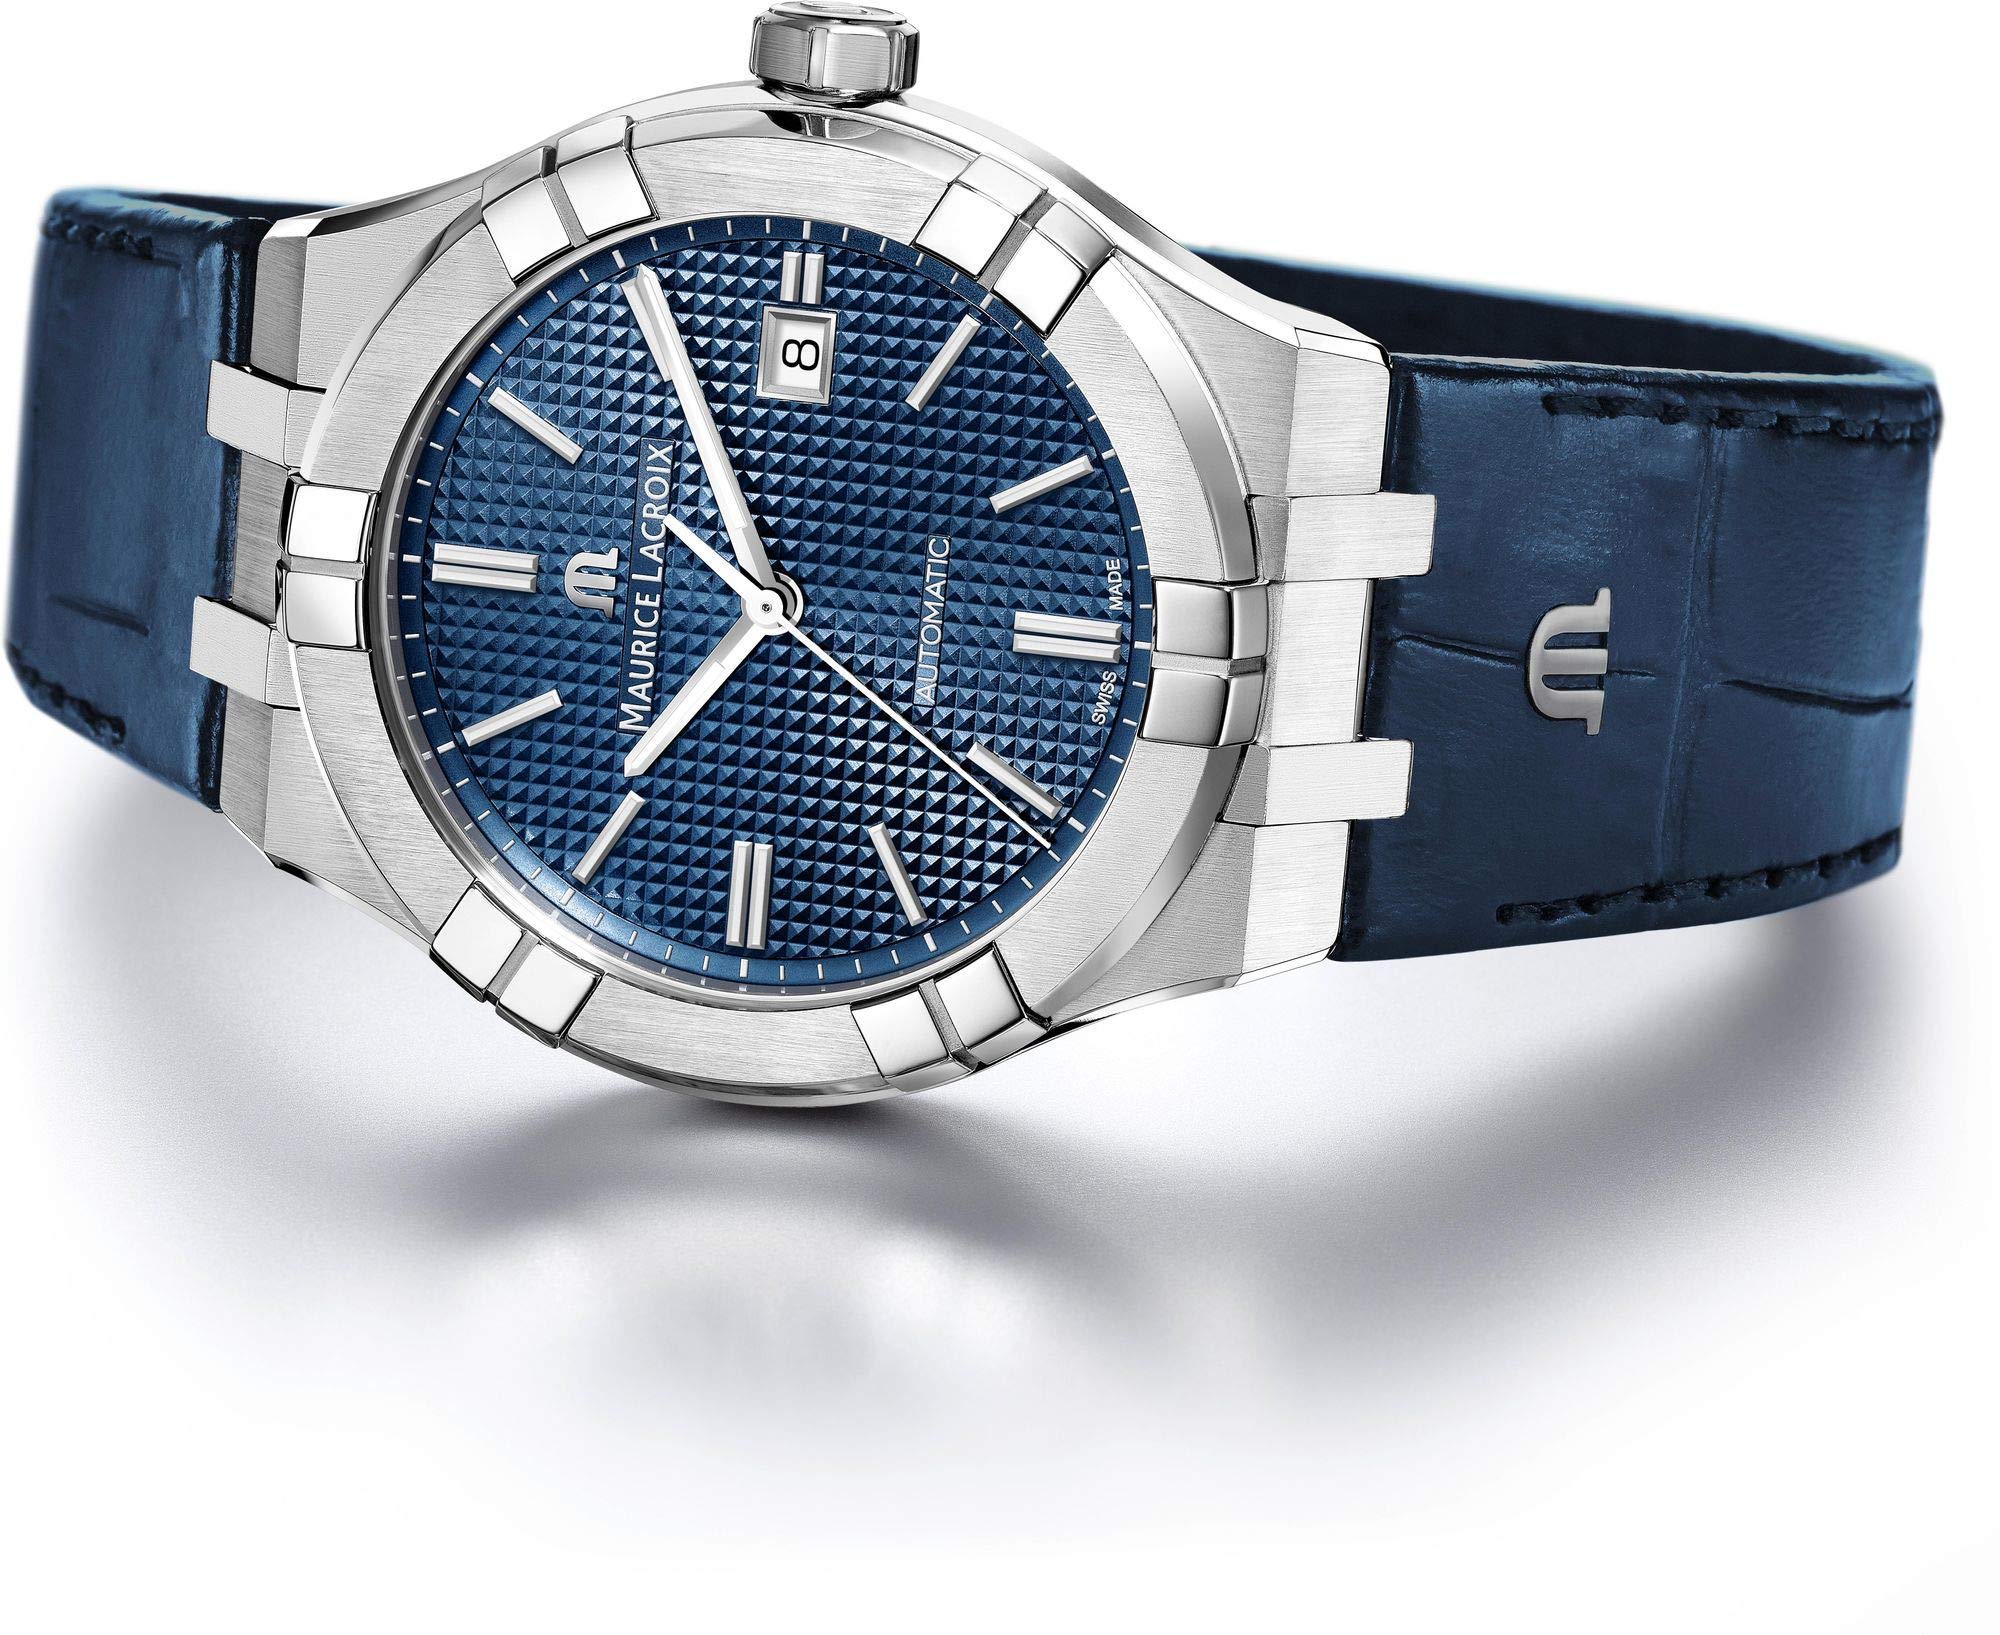 Maurice Lacroix Aikon Gents Automatic Watch, 42 mm, Blue, AI6008-SS001-430-1